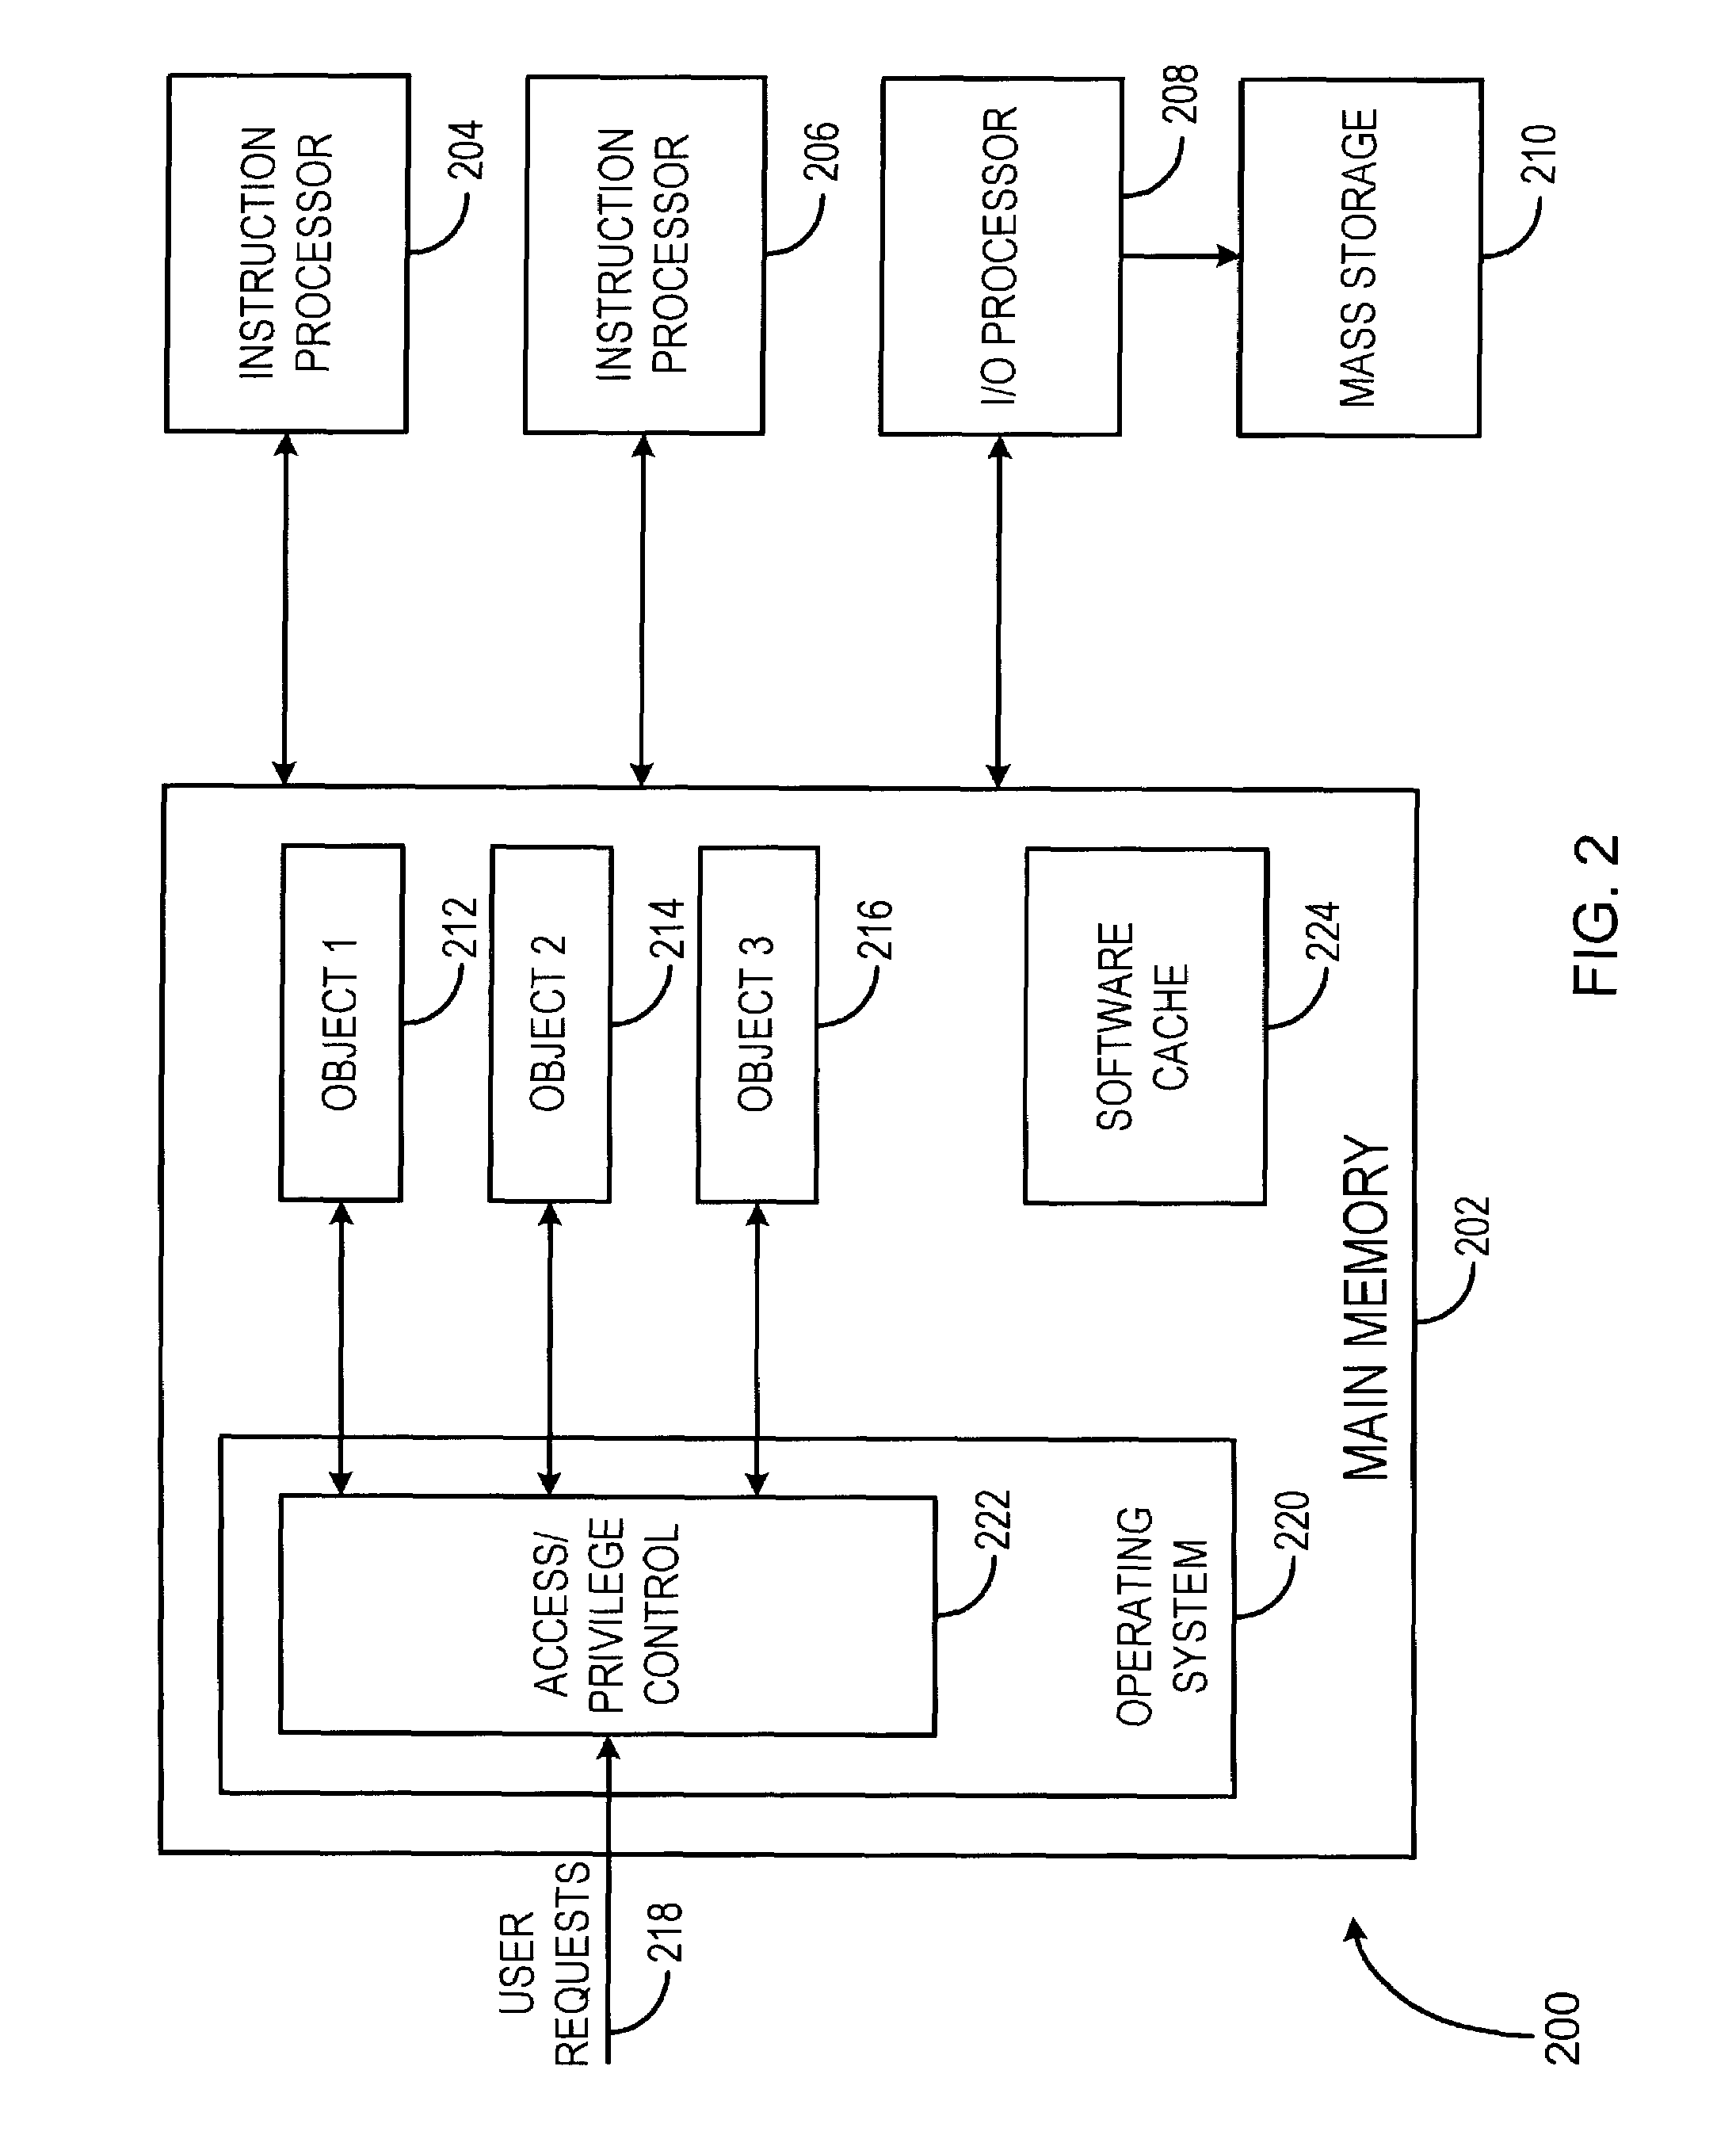 System and method for managing access rights and privileges in a data processing system